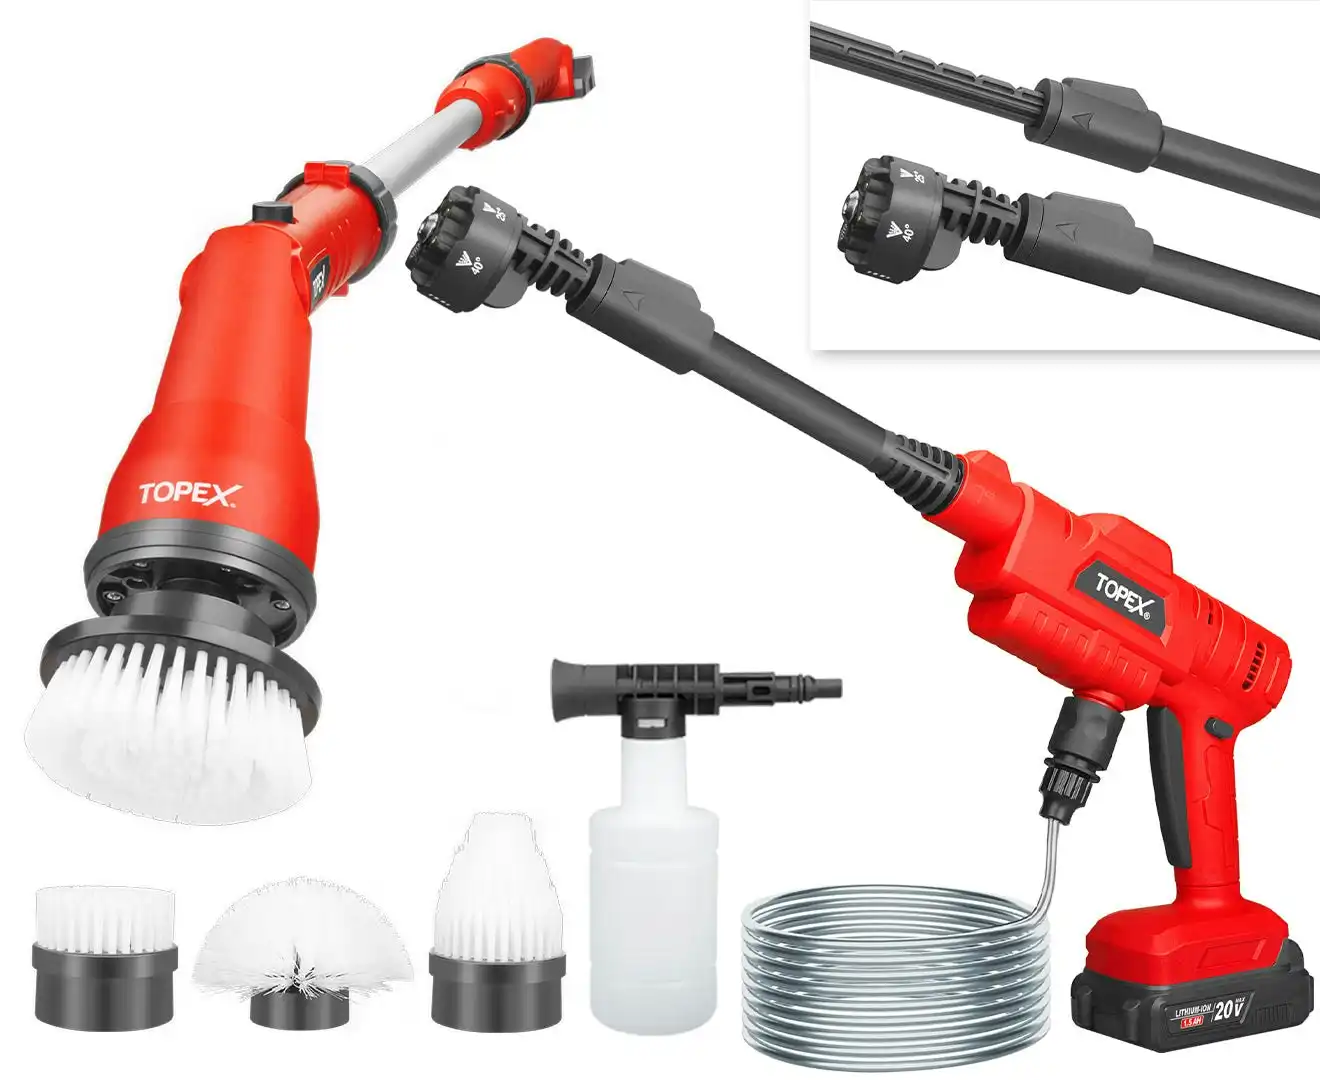 Topex 20V Cordless Power Tool Kit Telescoping Electric Scrubber Pressure Washer